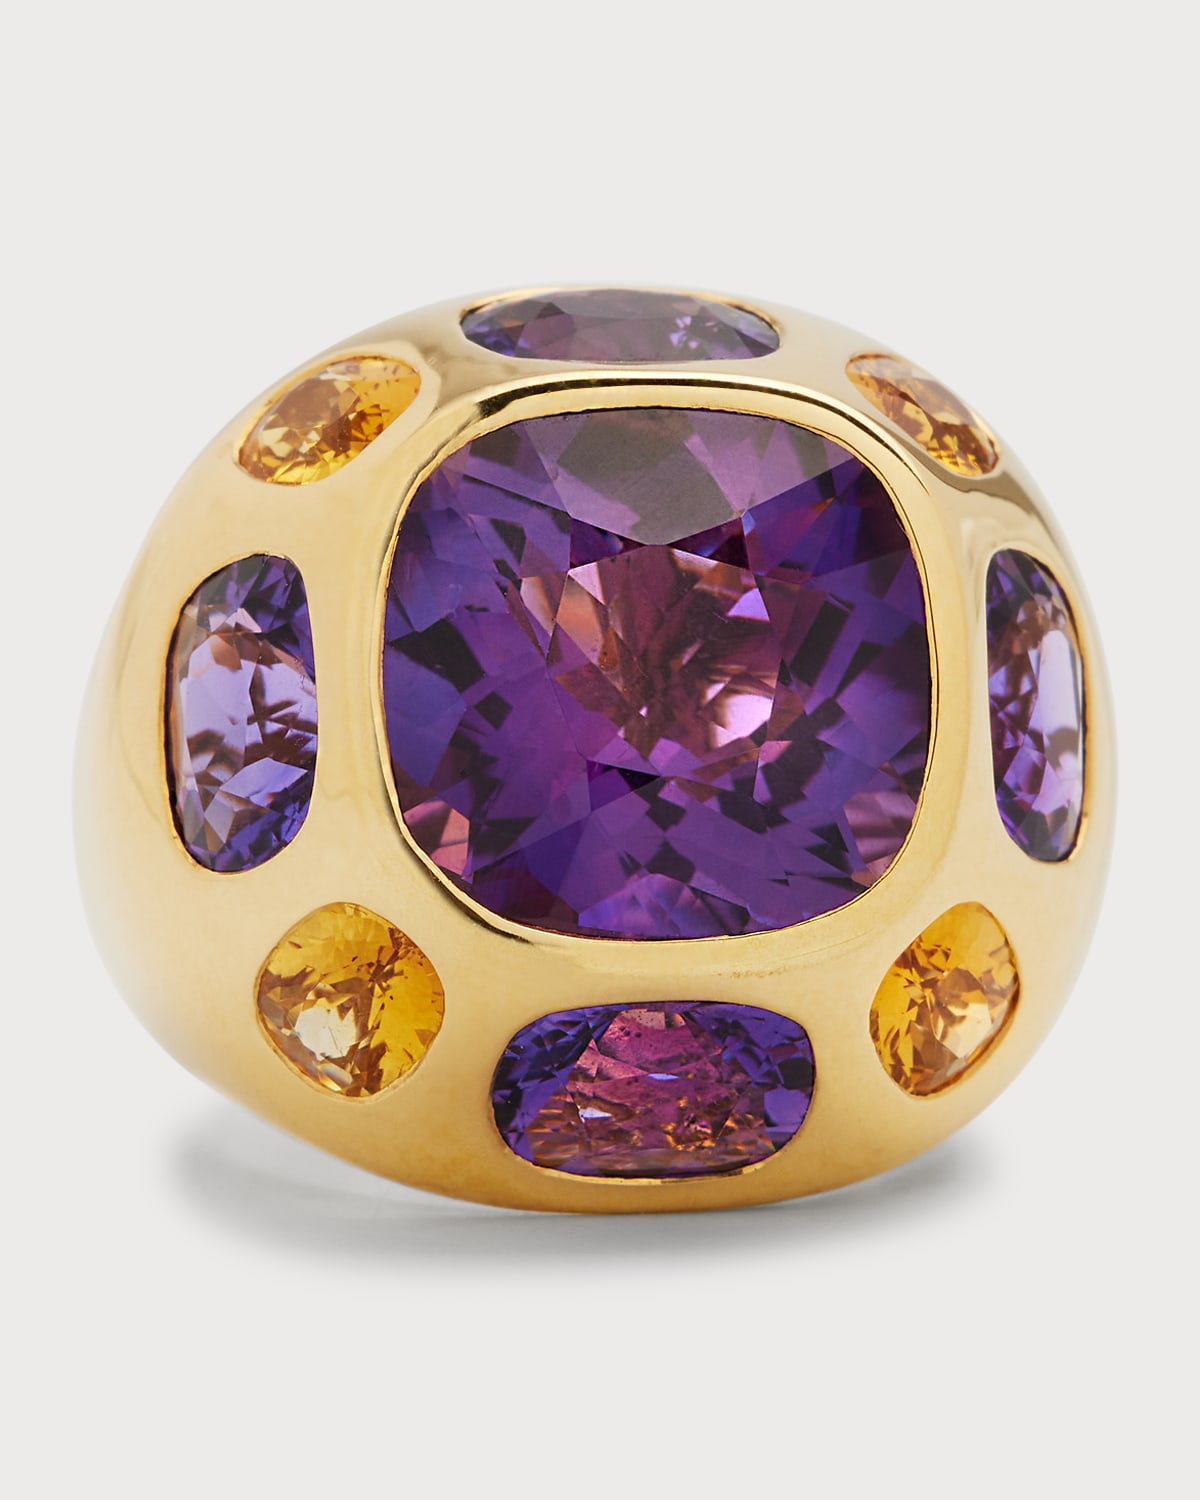 18K Yellow Gold Pietra Amethyst and Citrine Ring, Size 6.5